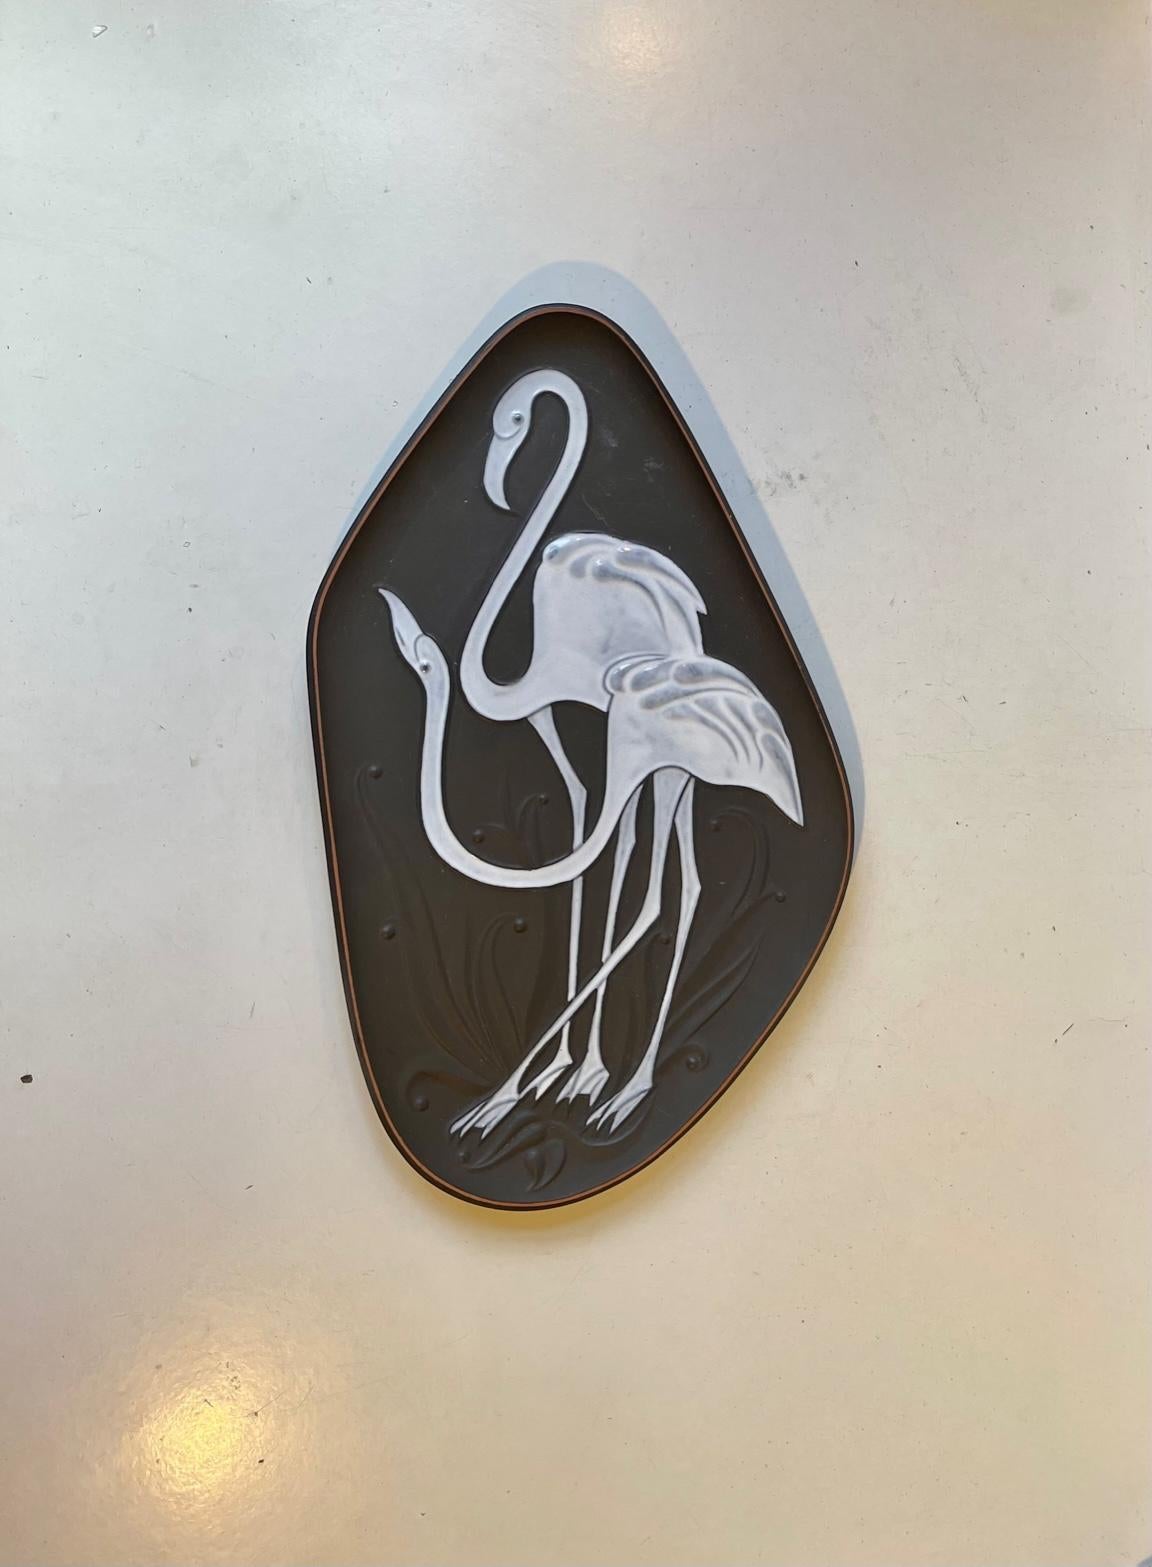 A stylish asymmetrical organically shaped dish or wall plaque decorated with a pair of Flamingos in white glaze. Designed by Piotr Labuzek Baro and made at Knabstrup in Denmark circa 1960. It can be wall hung or displayed as a dish. Measurements: